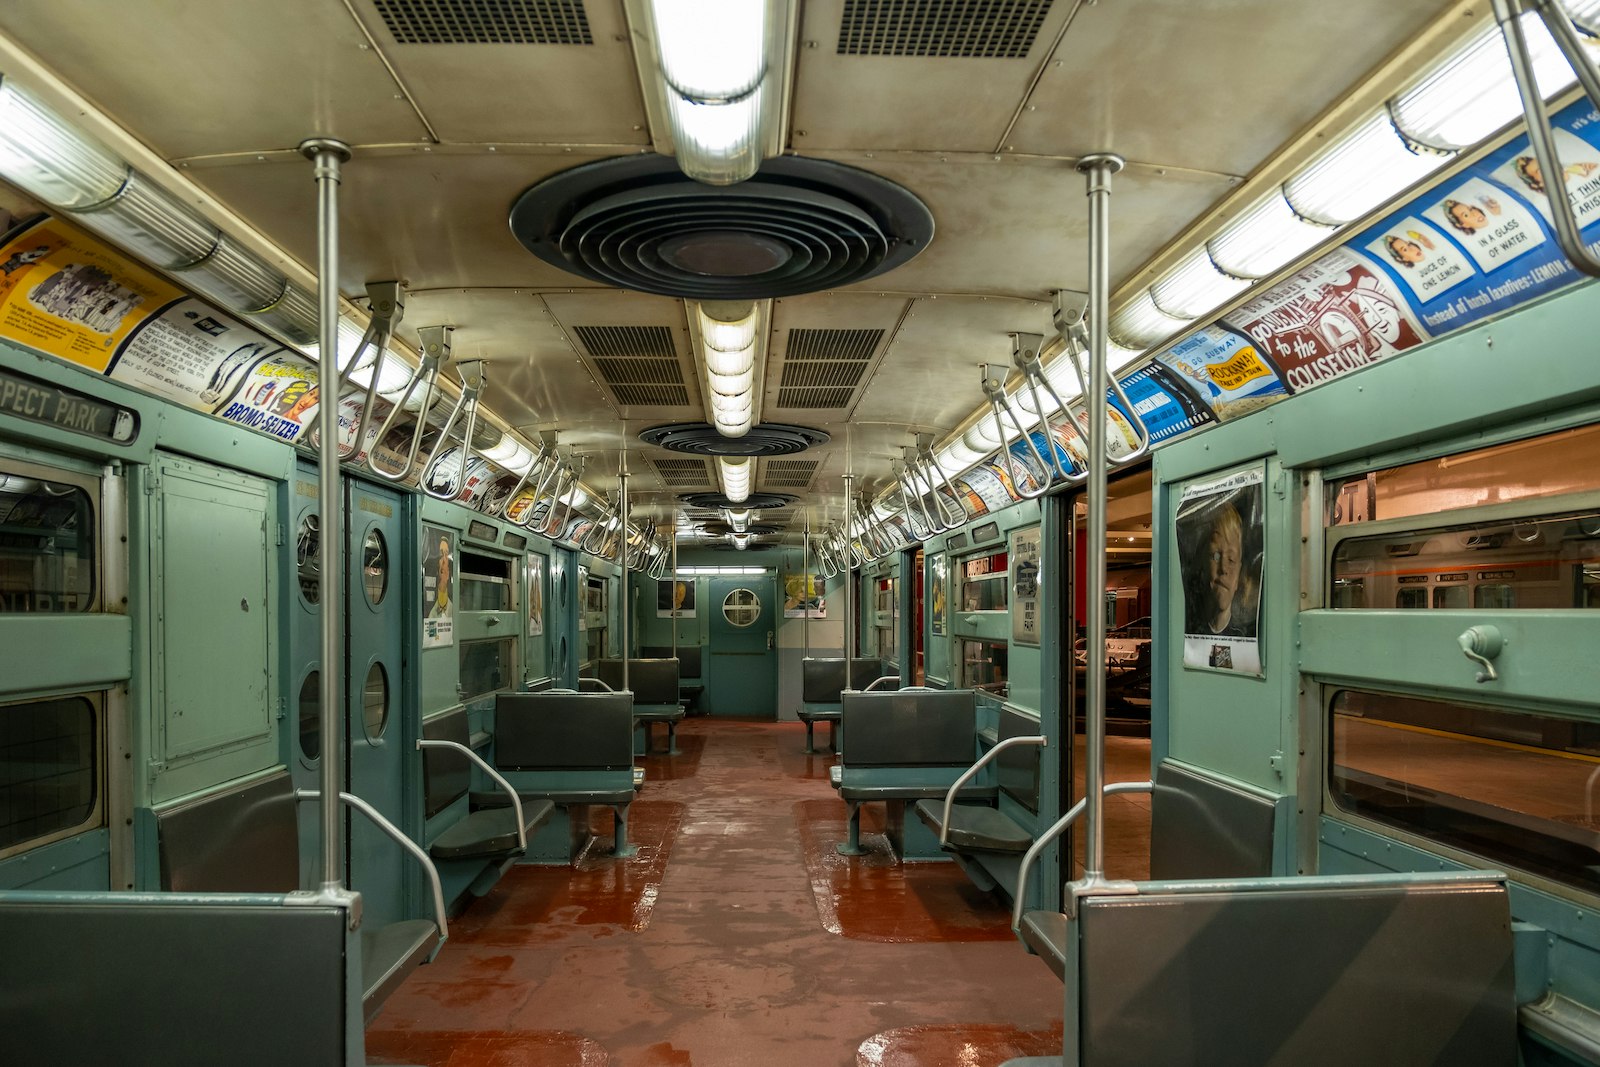 A vintage subway train car featuring teal walls and seats